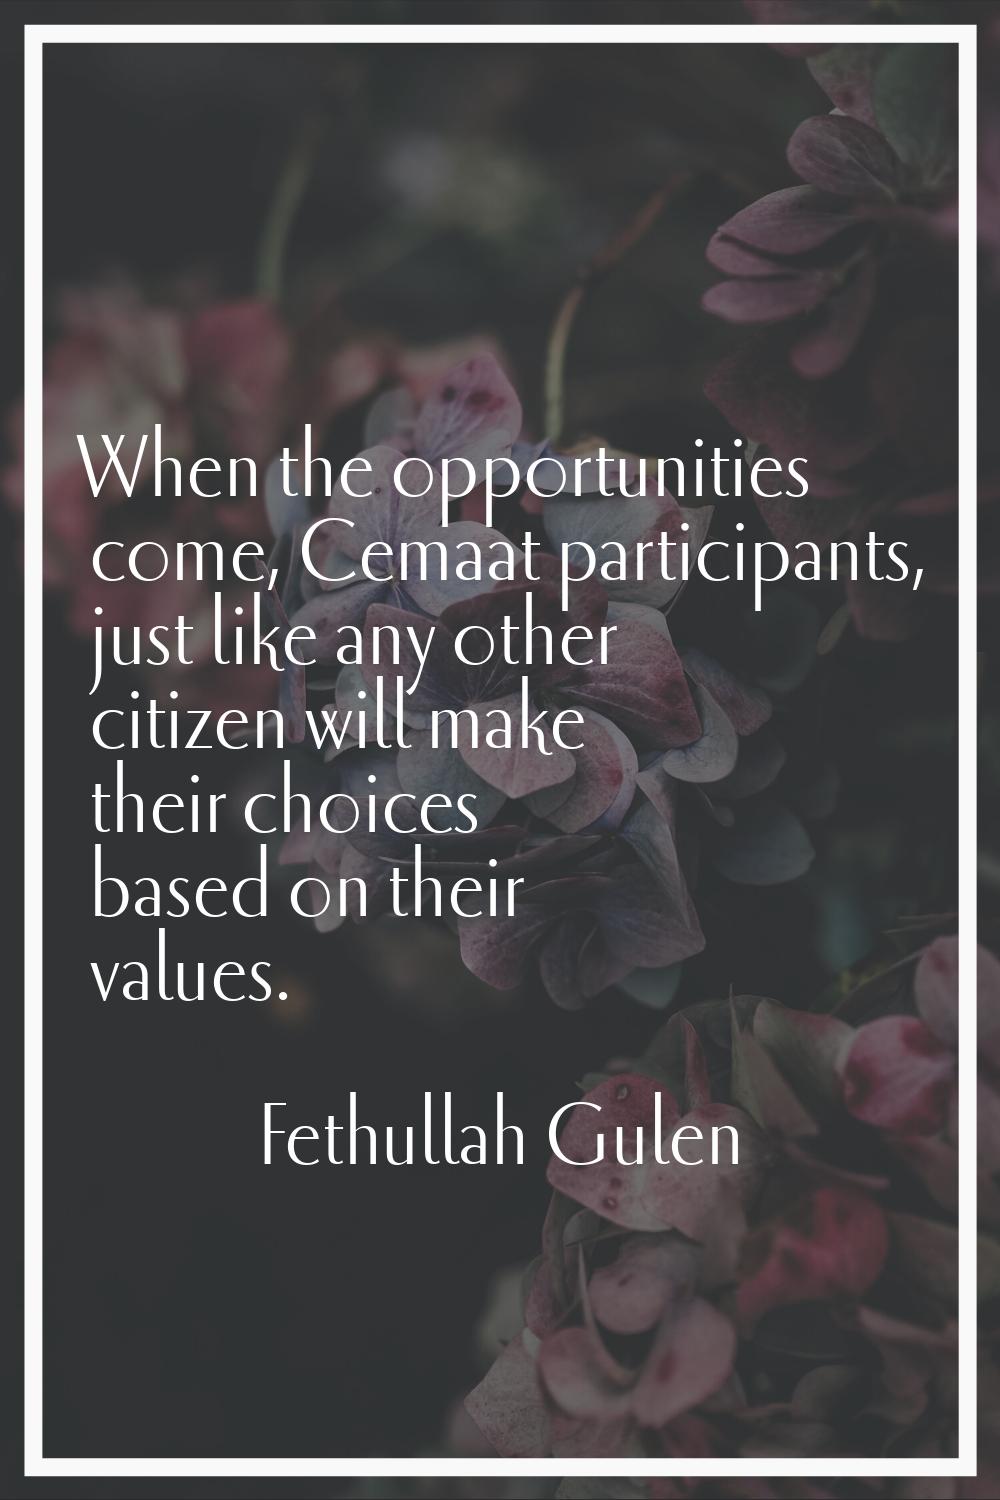 When the opportunities come, Cemaat participants, just like any other citizen will make their choic